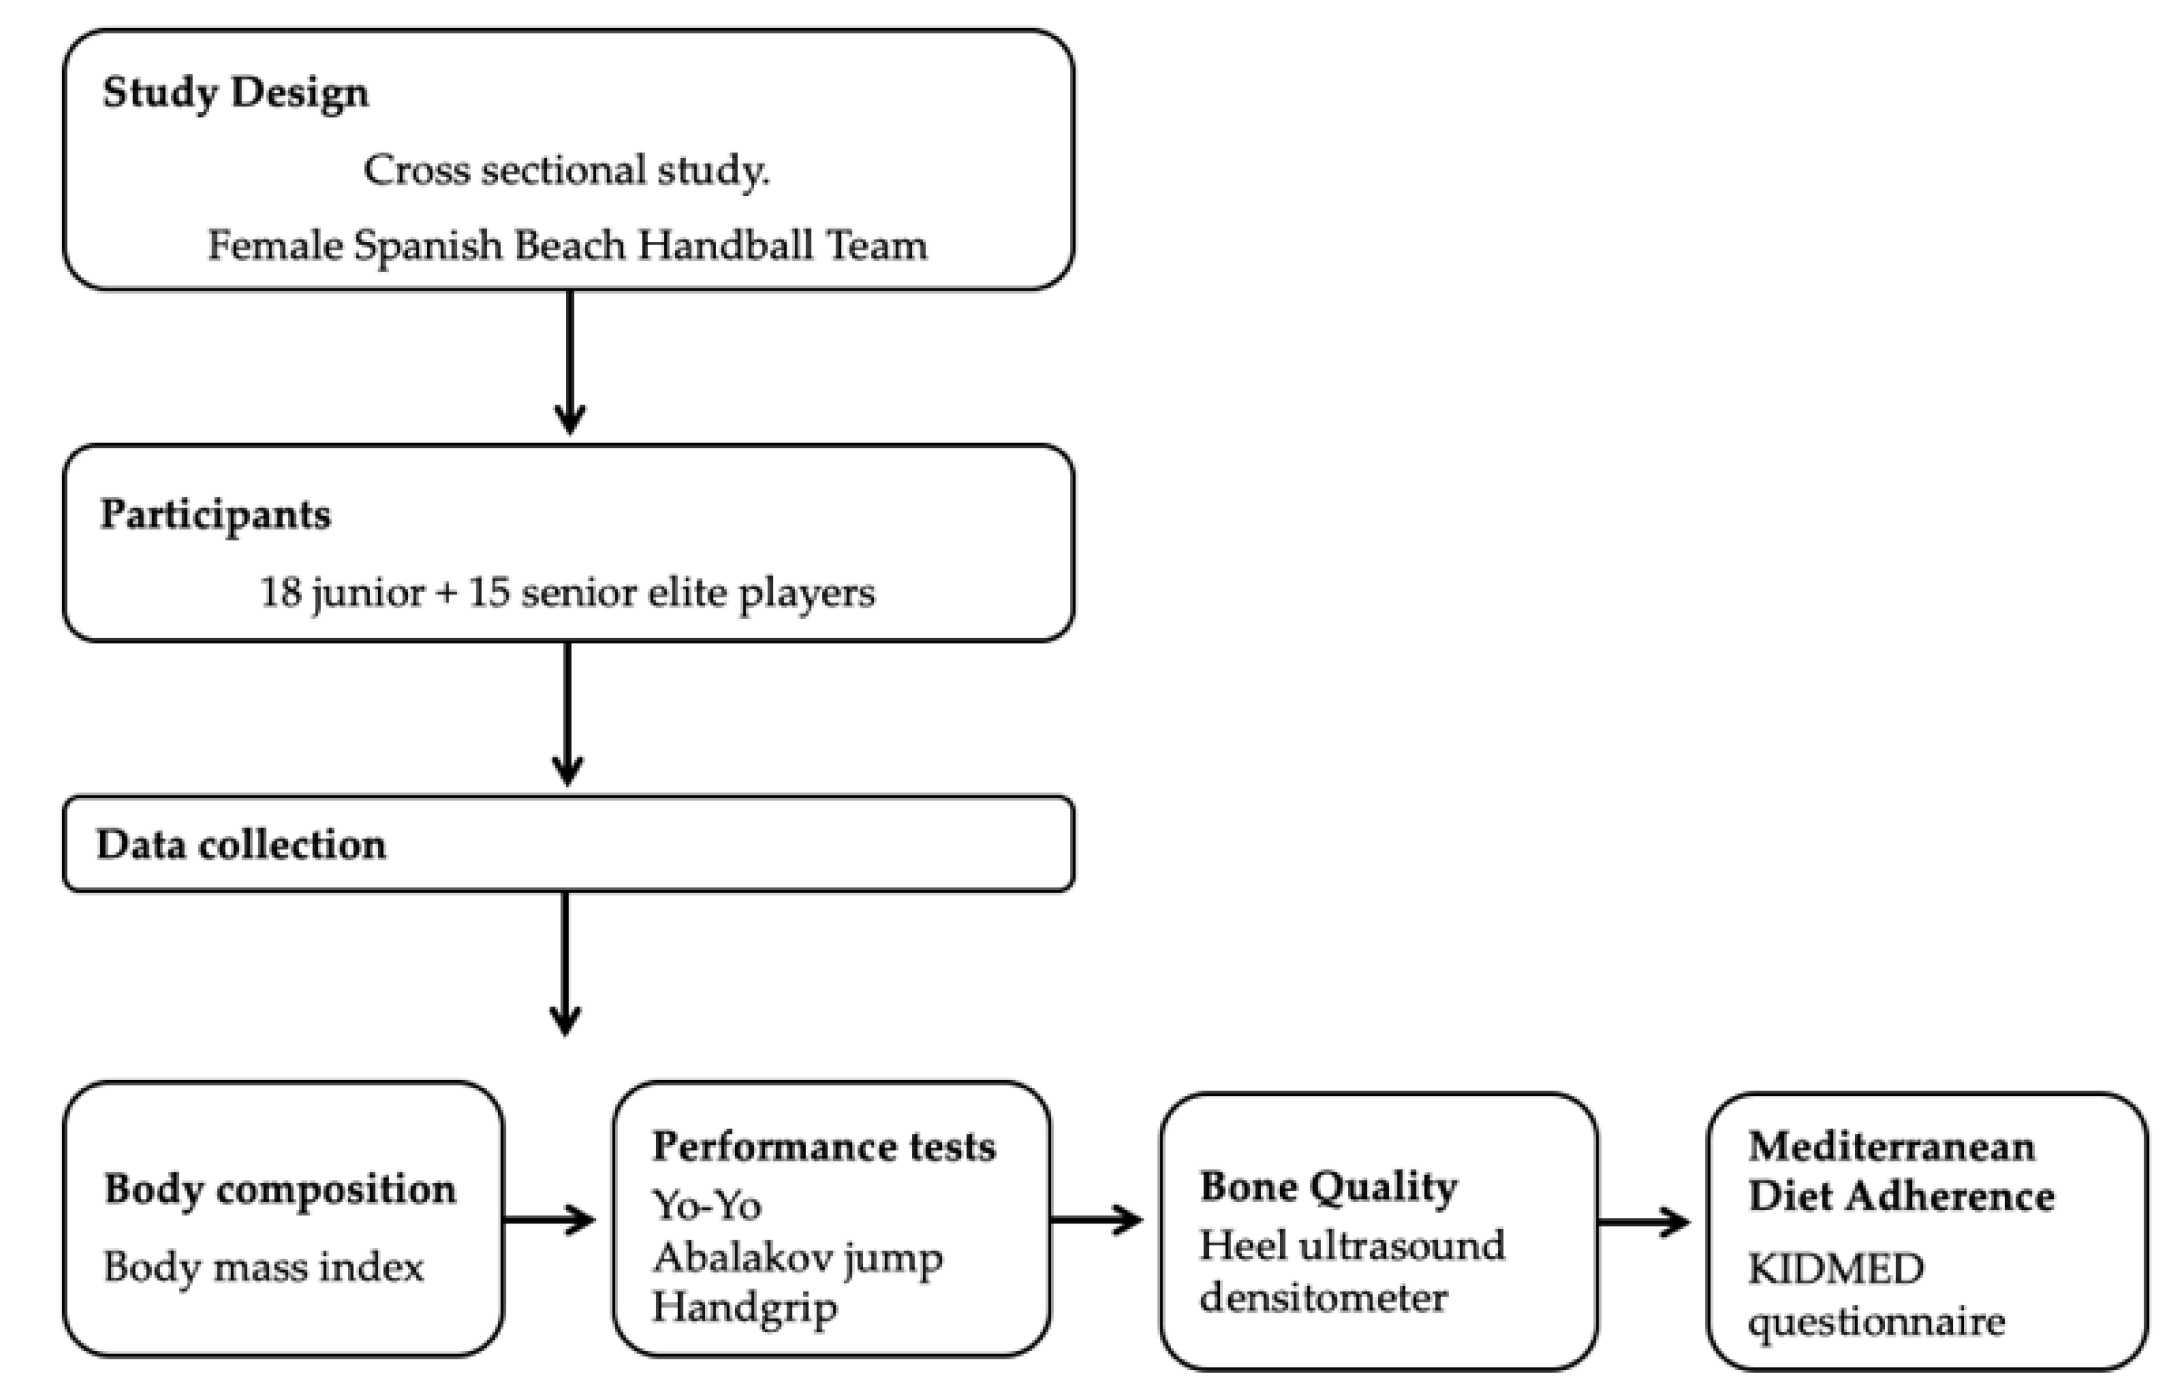 Nutrients | Free Full-Text | Study of Physical Fitness, Bone and Mediterranean Diet in Professional Female Beach Handball Players: Cross-Sectional Study